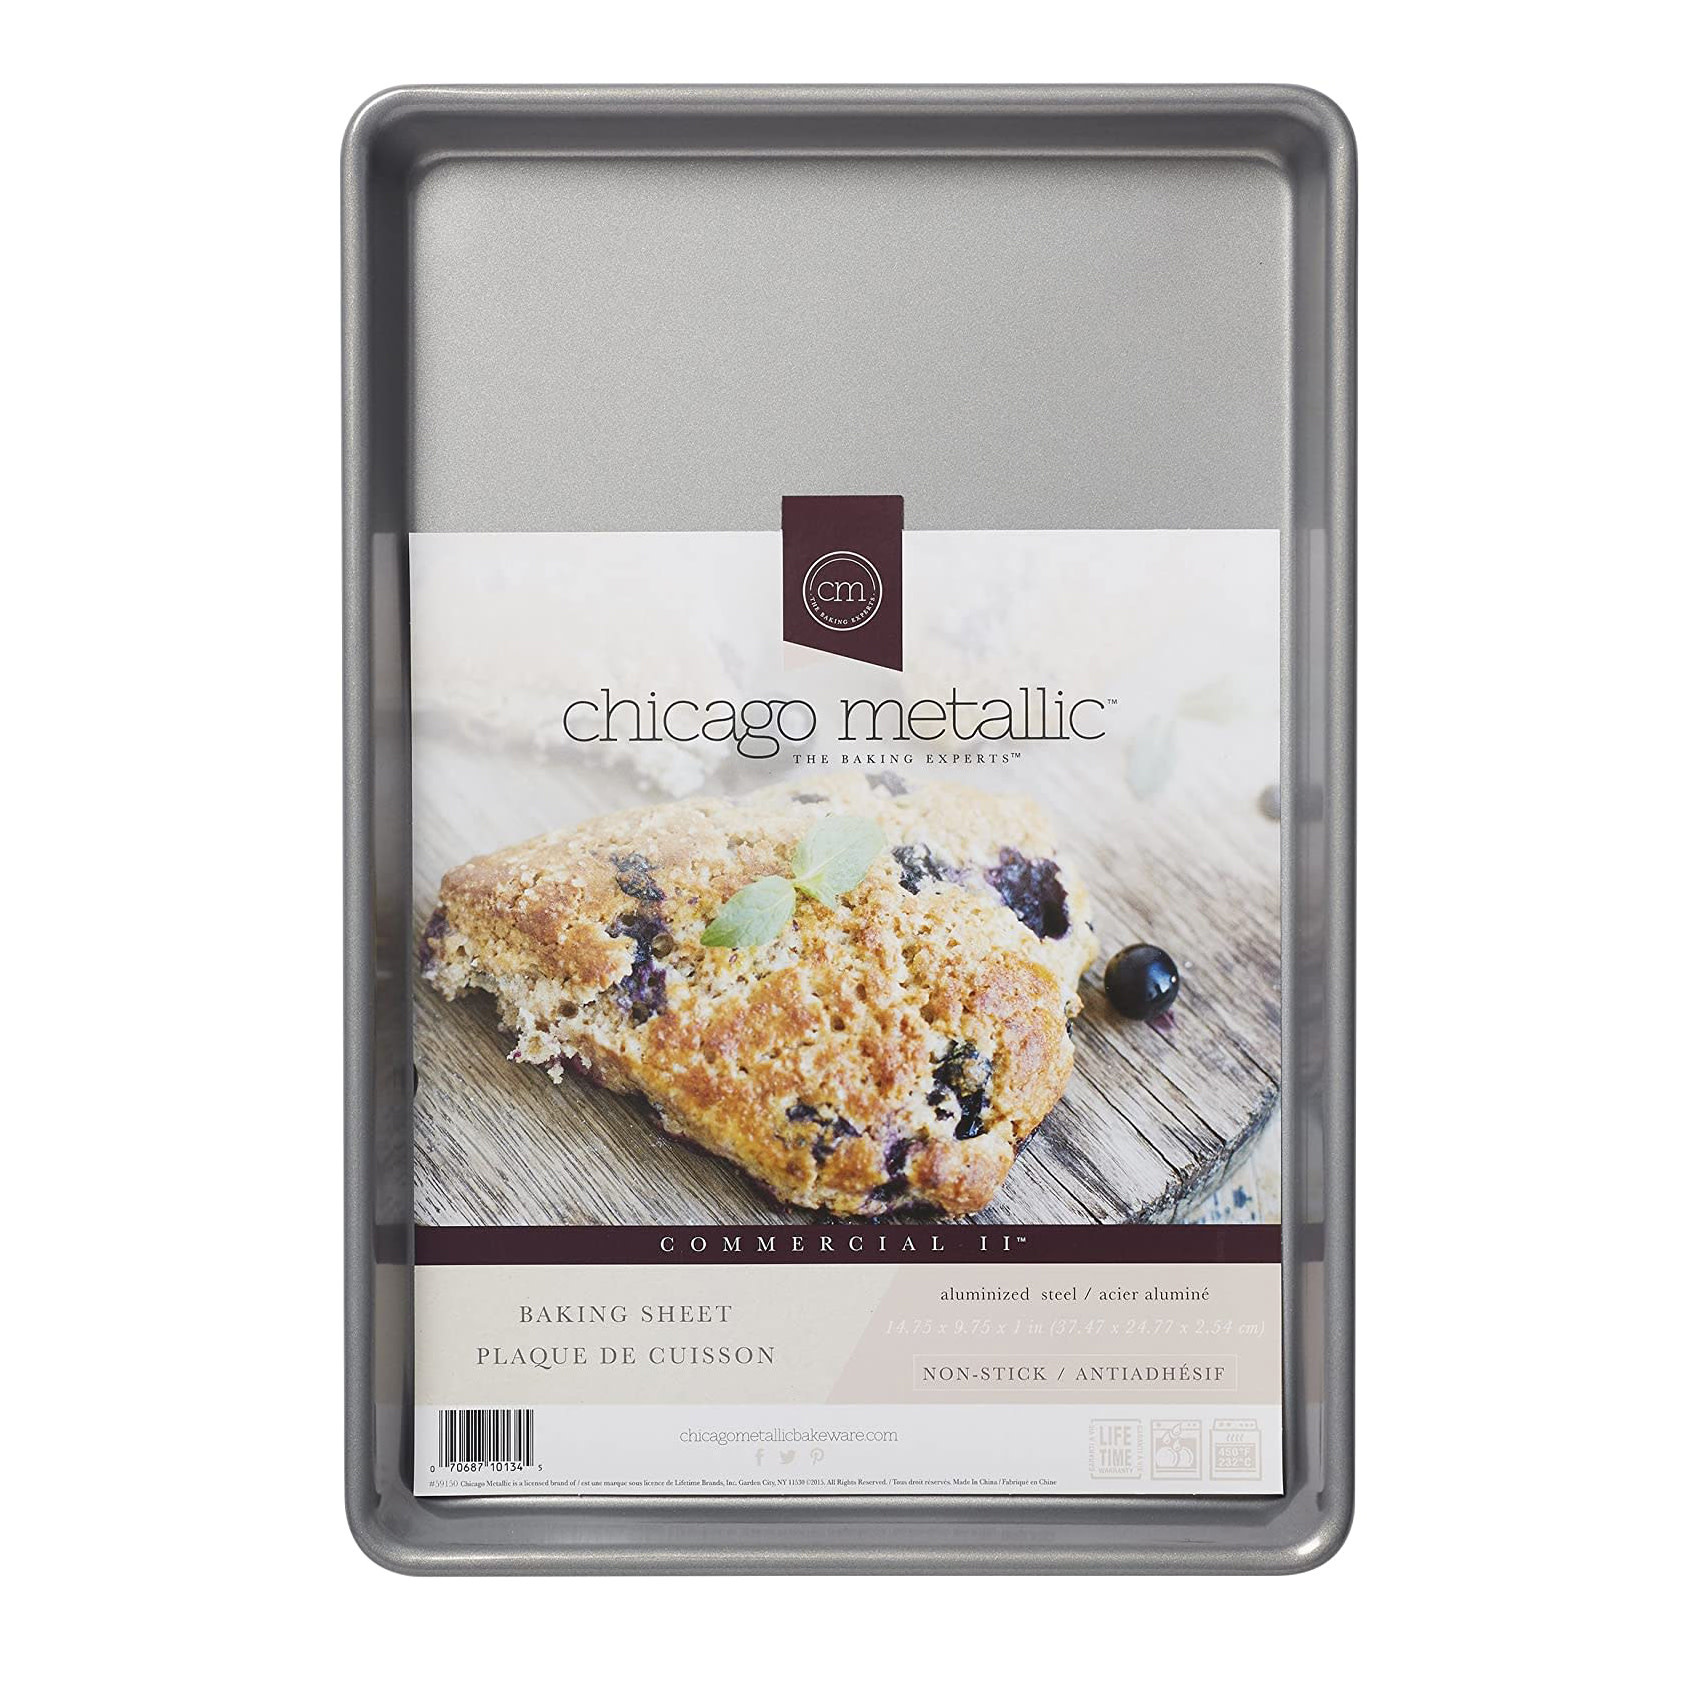 Chicago Metallic Professional Jelly Roll Pan Set of 2 with Bonus Cooling  Rack 12x17 Bakeware